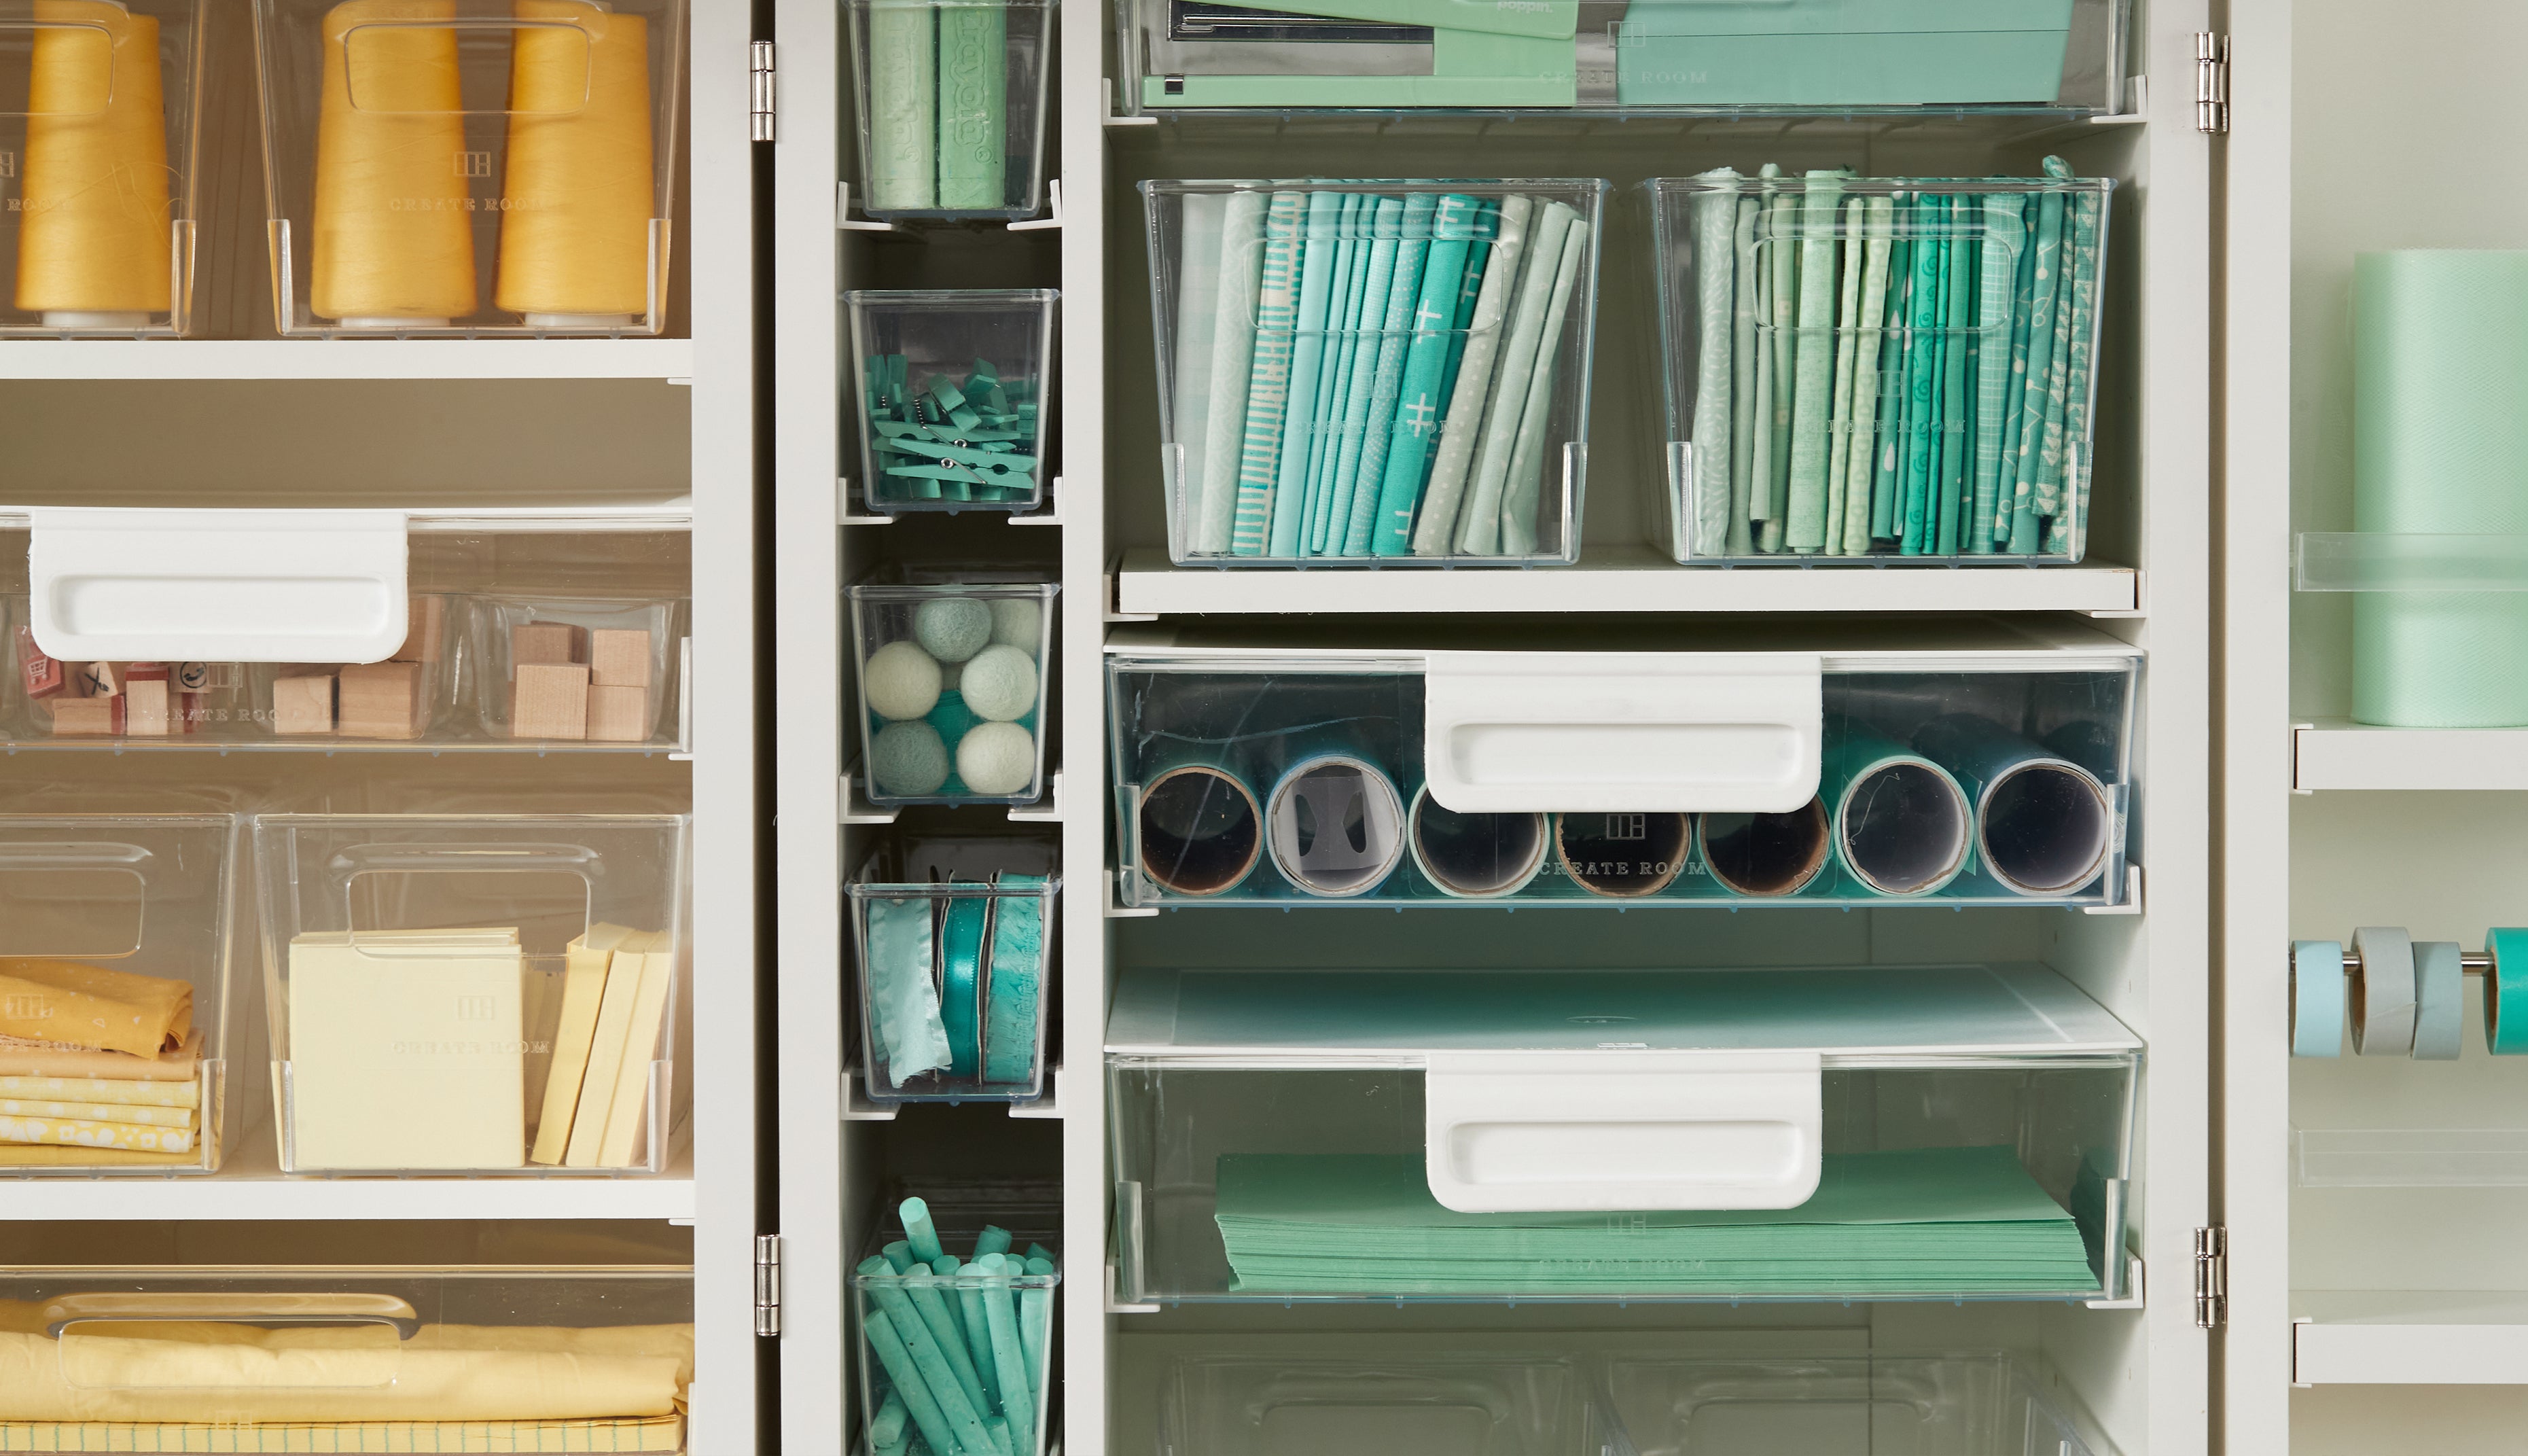 Spring Cleaning Your Craft Space: Organization and Storage Ideas